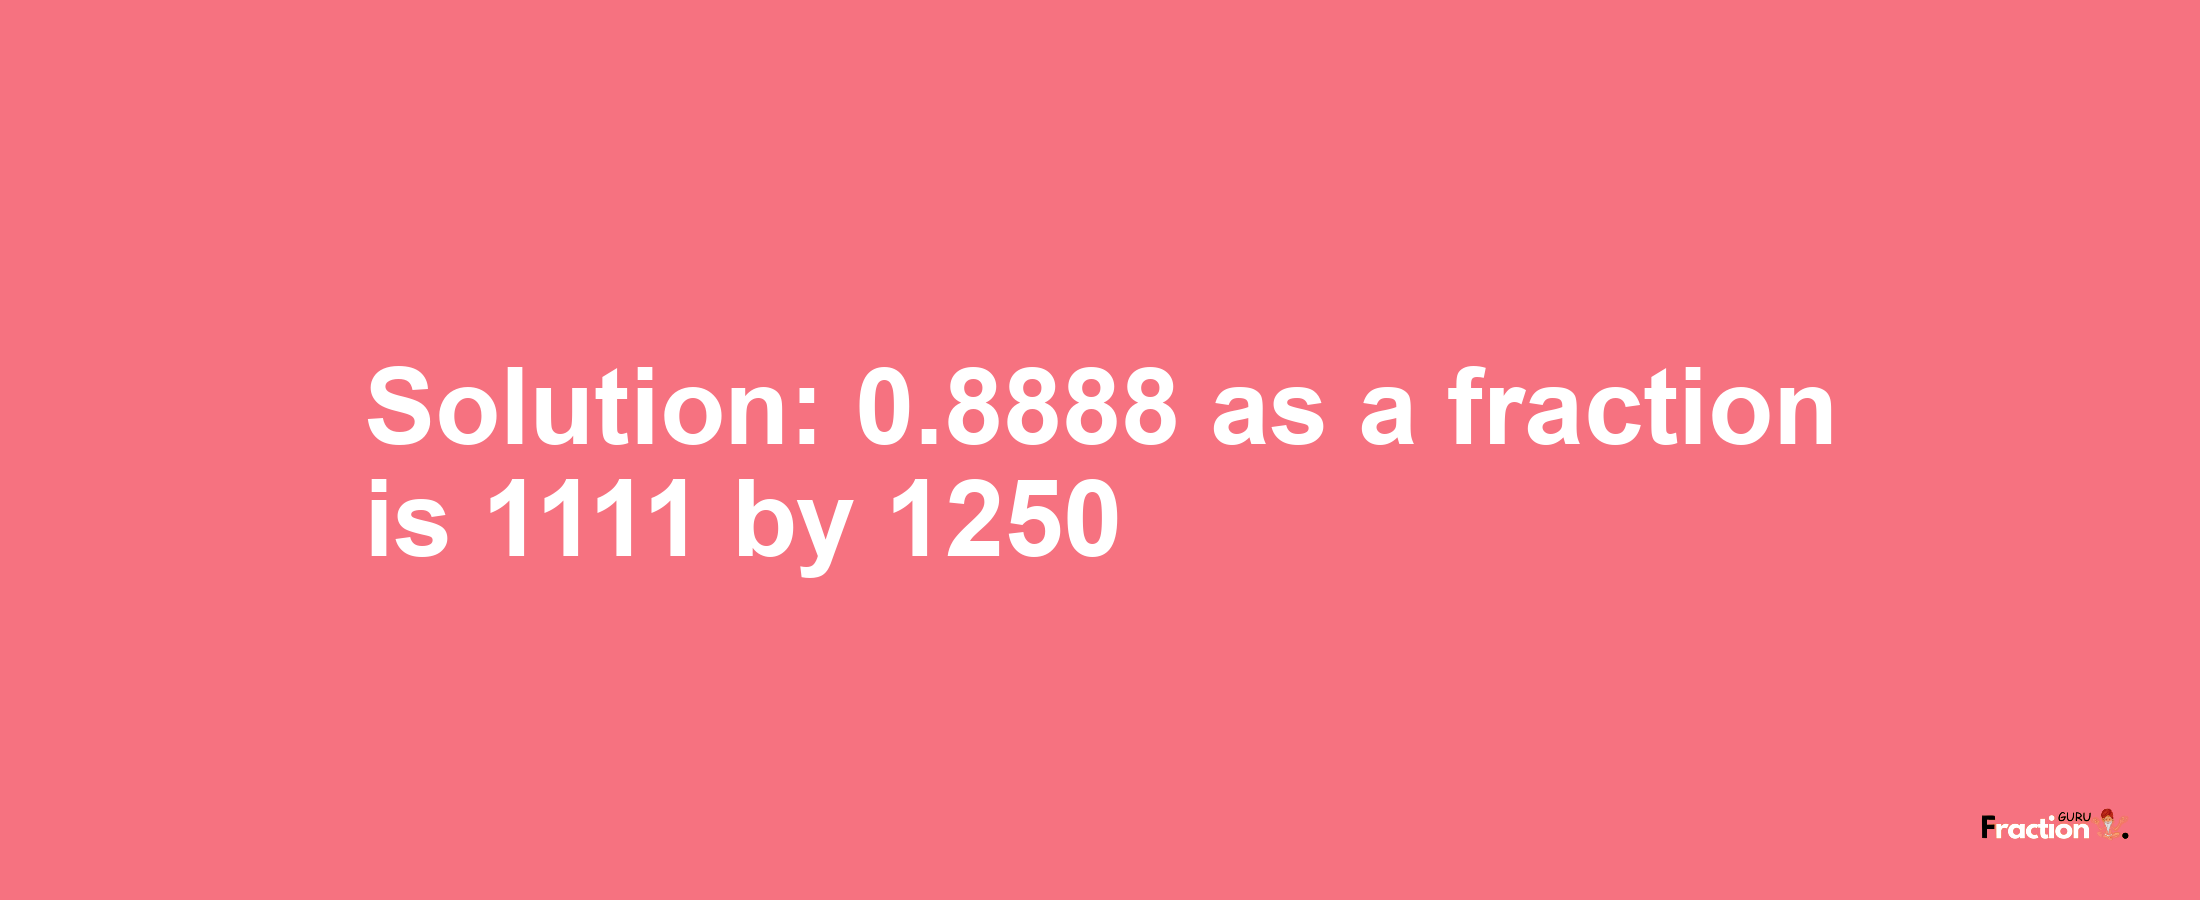 Solution:0.8888 as a fraction is 1111/1250